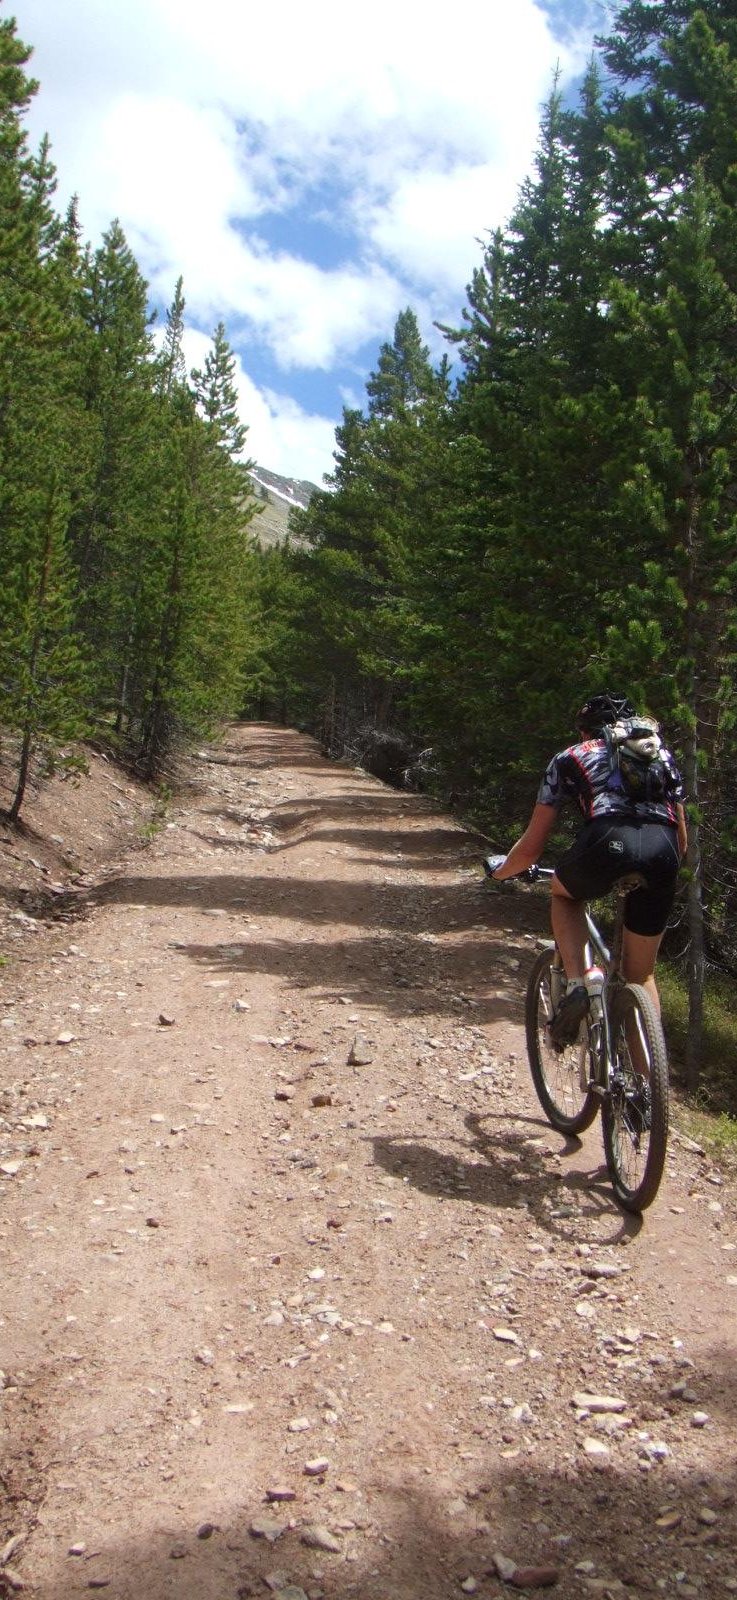 Breck-Epic Course Recon:  Penn. Creek Stage & Gold Dust Stage